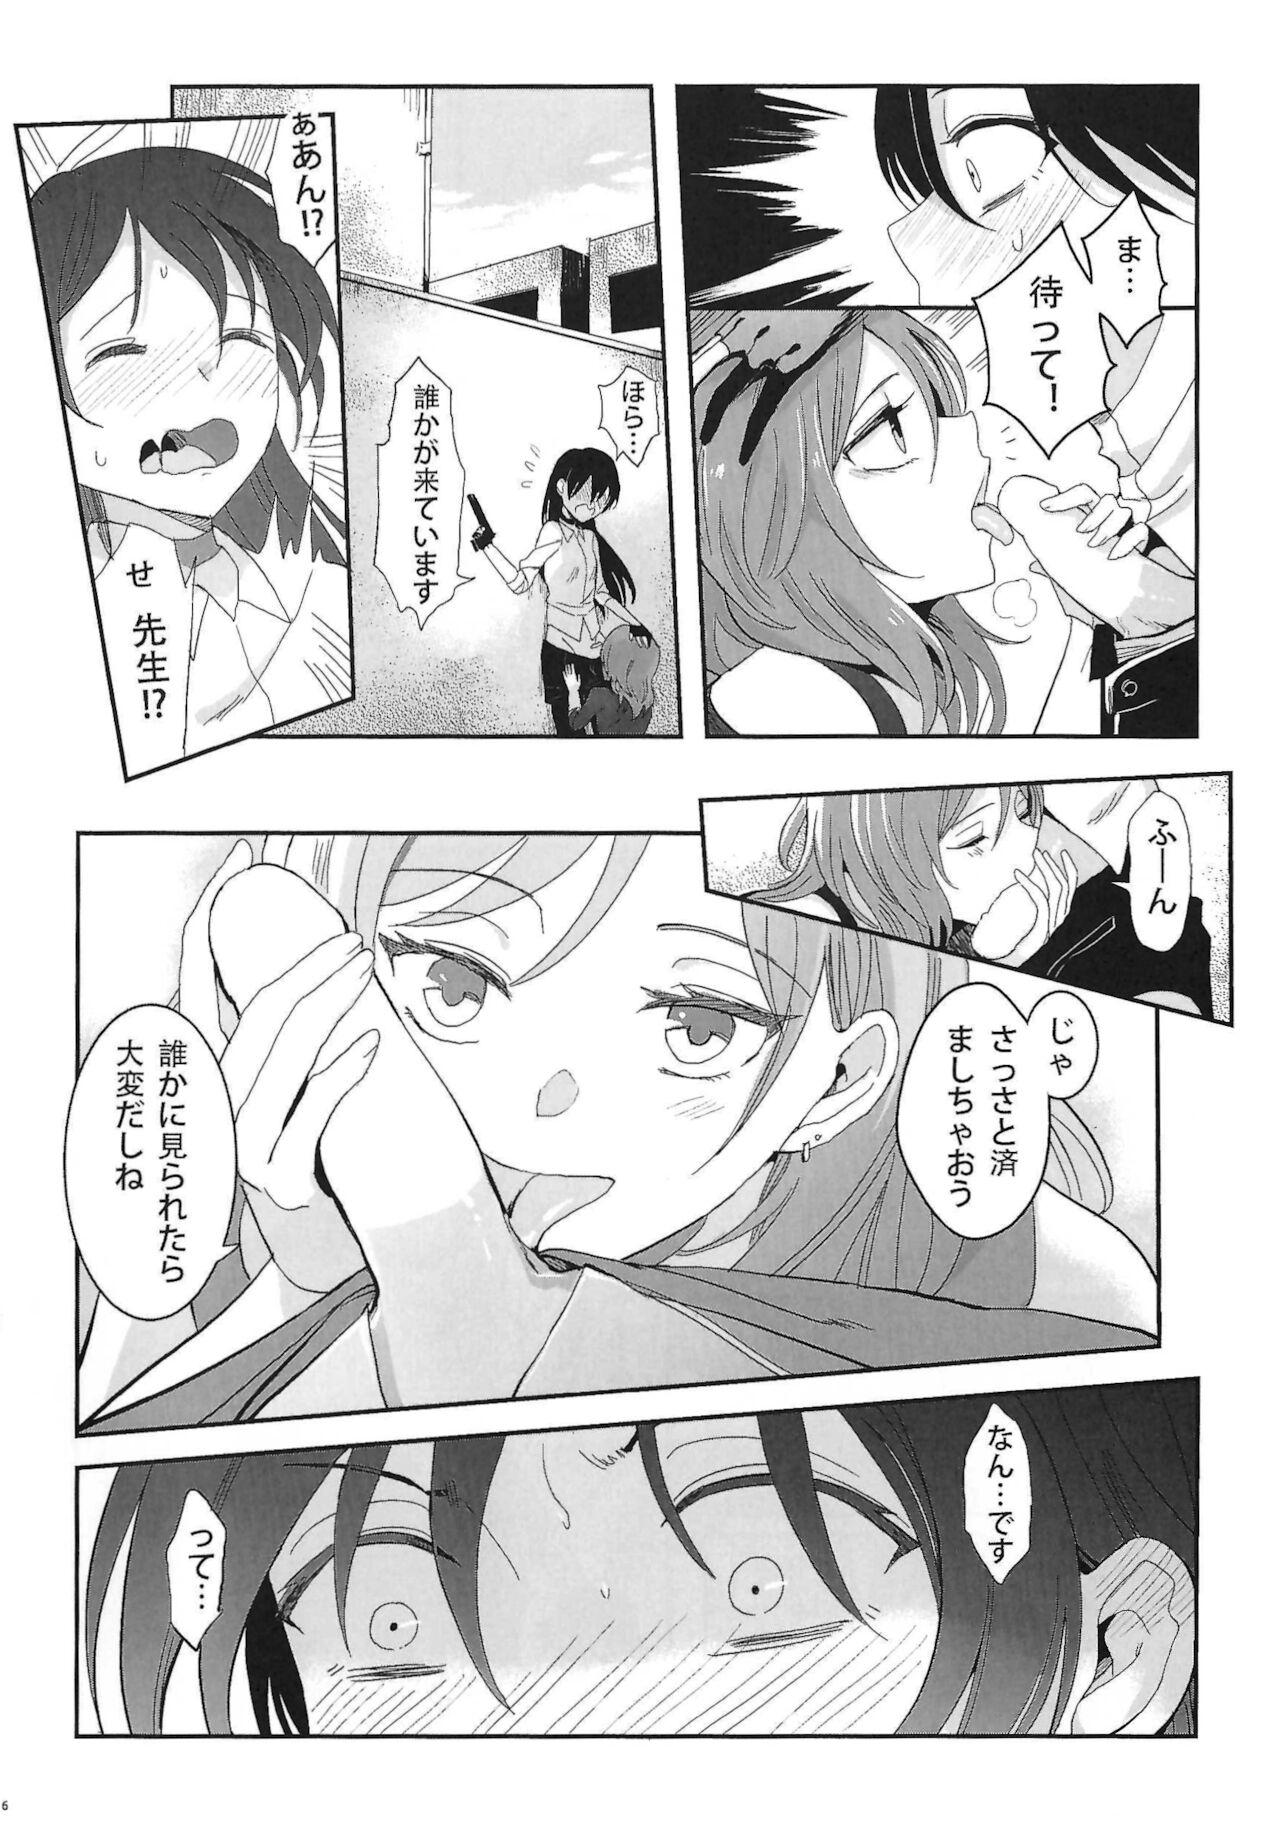 Assfucked 斜辺線 - Love live Hardfuck - Page 7